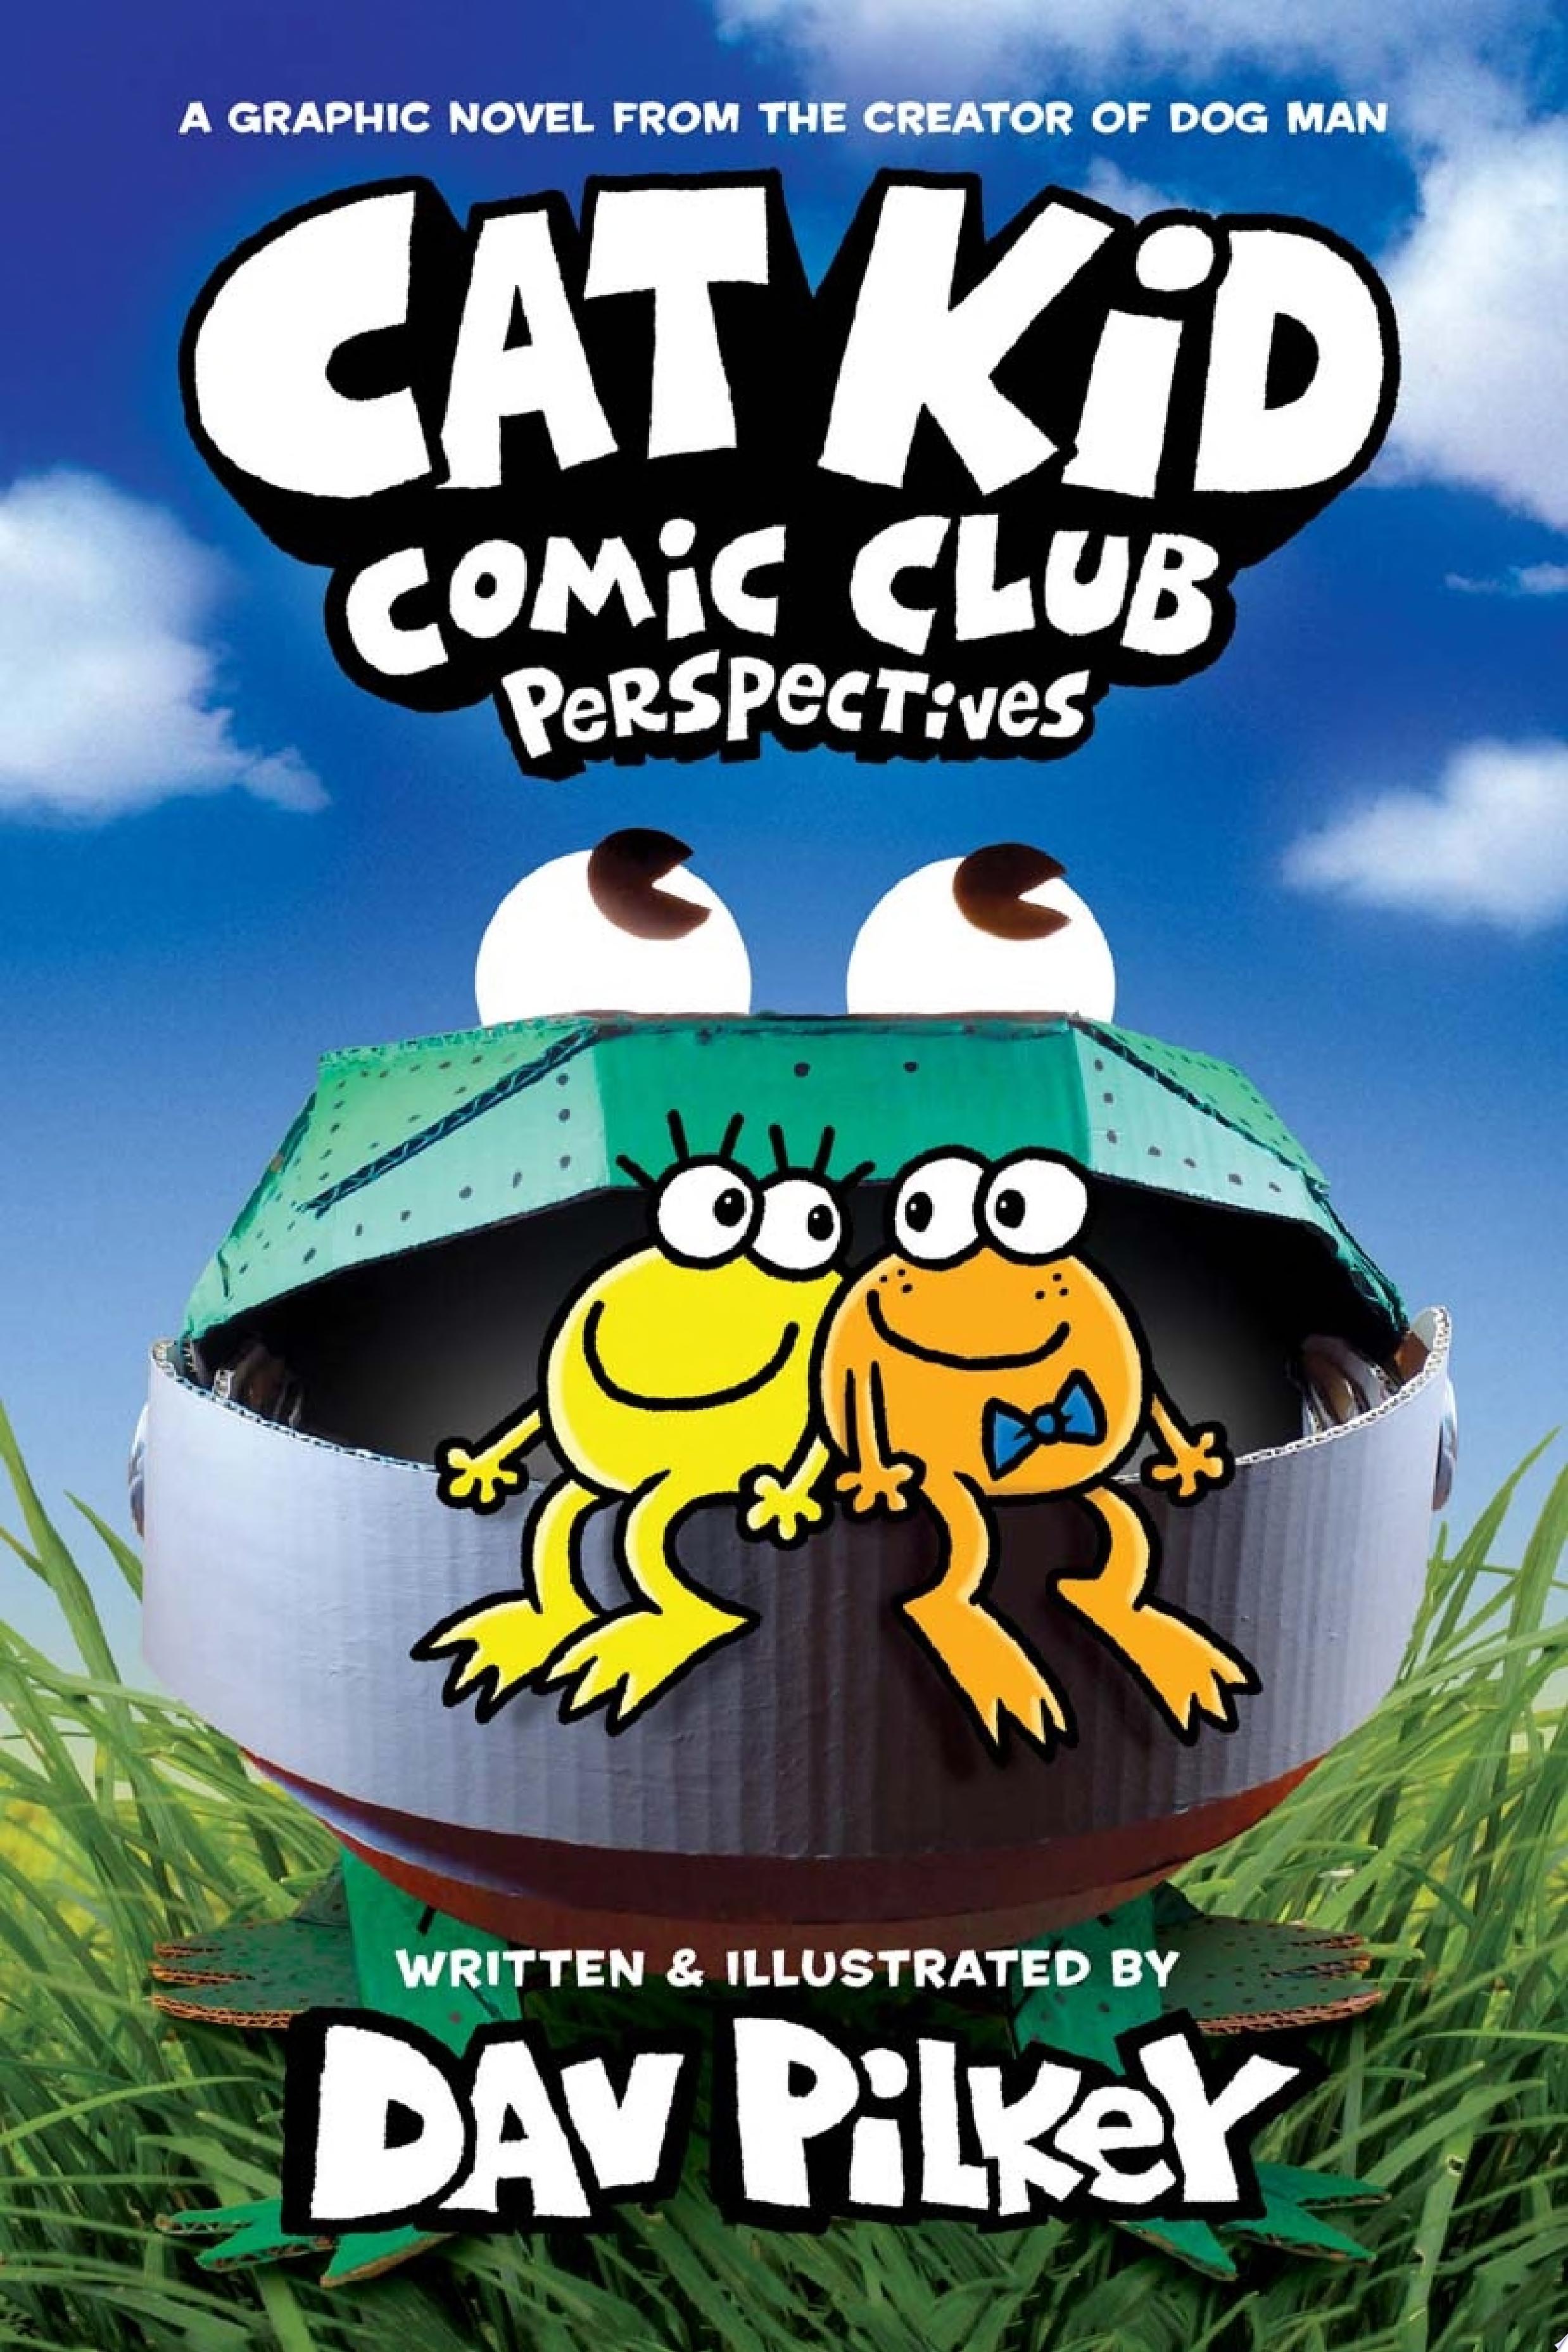 Image for "Cat Kid Comic Club: Perspectives: A Graphic Novel (Cat Kid Comic Club #2): From the Creator of Dog Man"